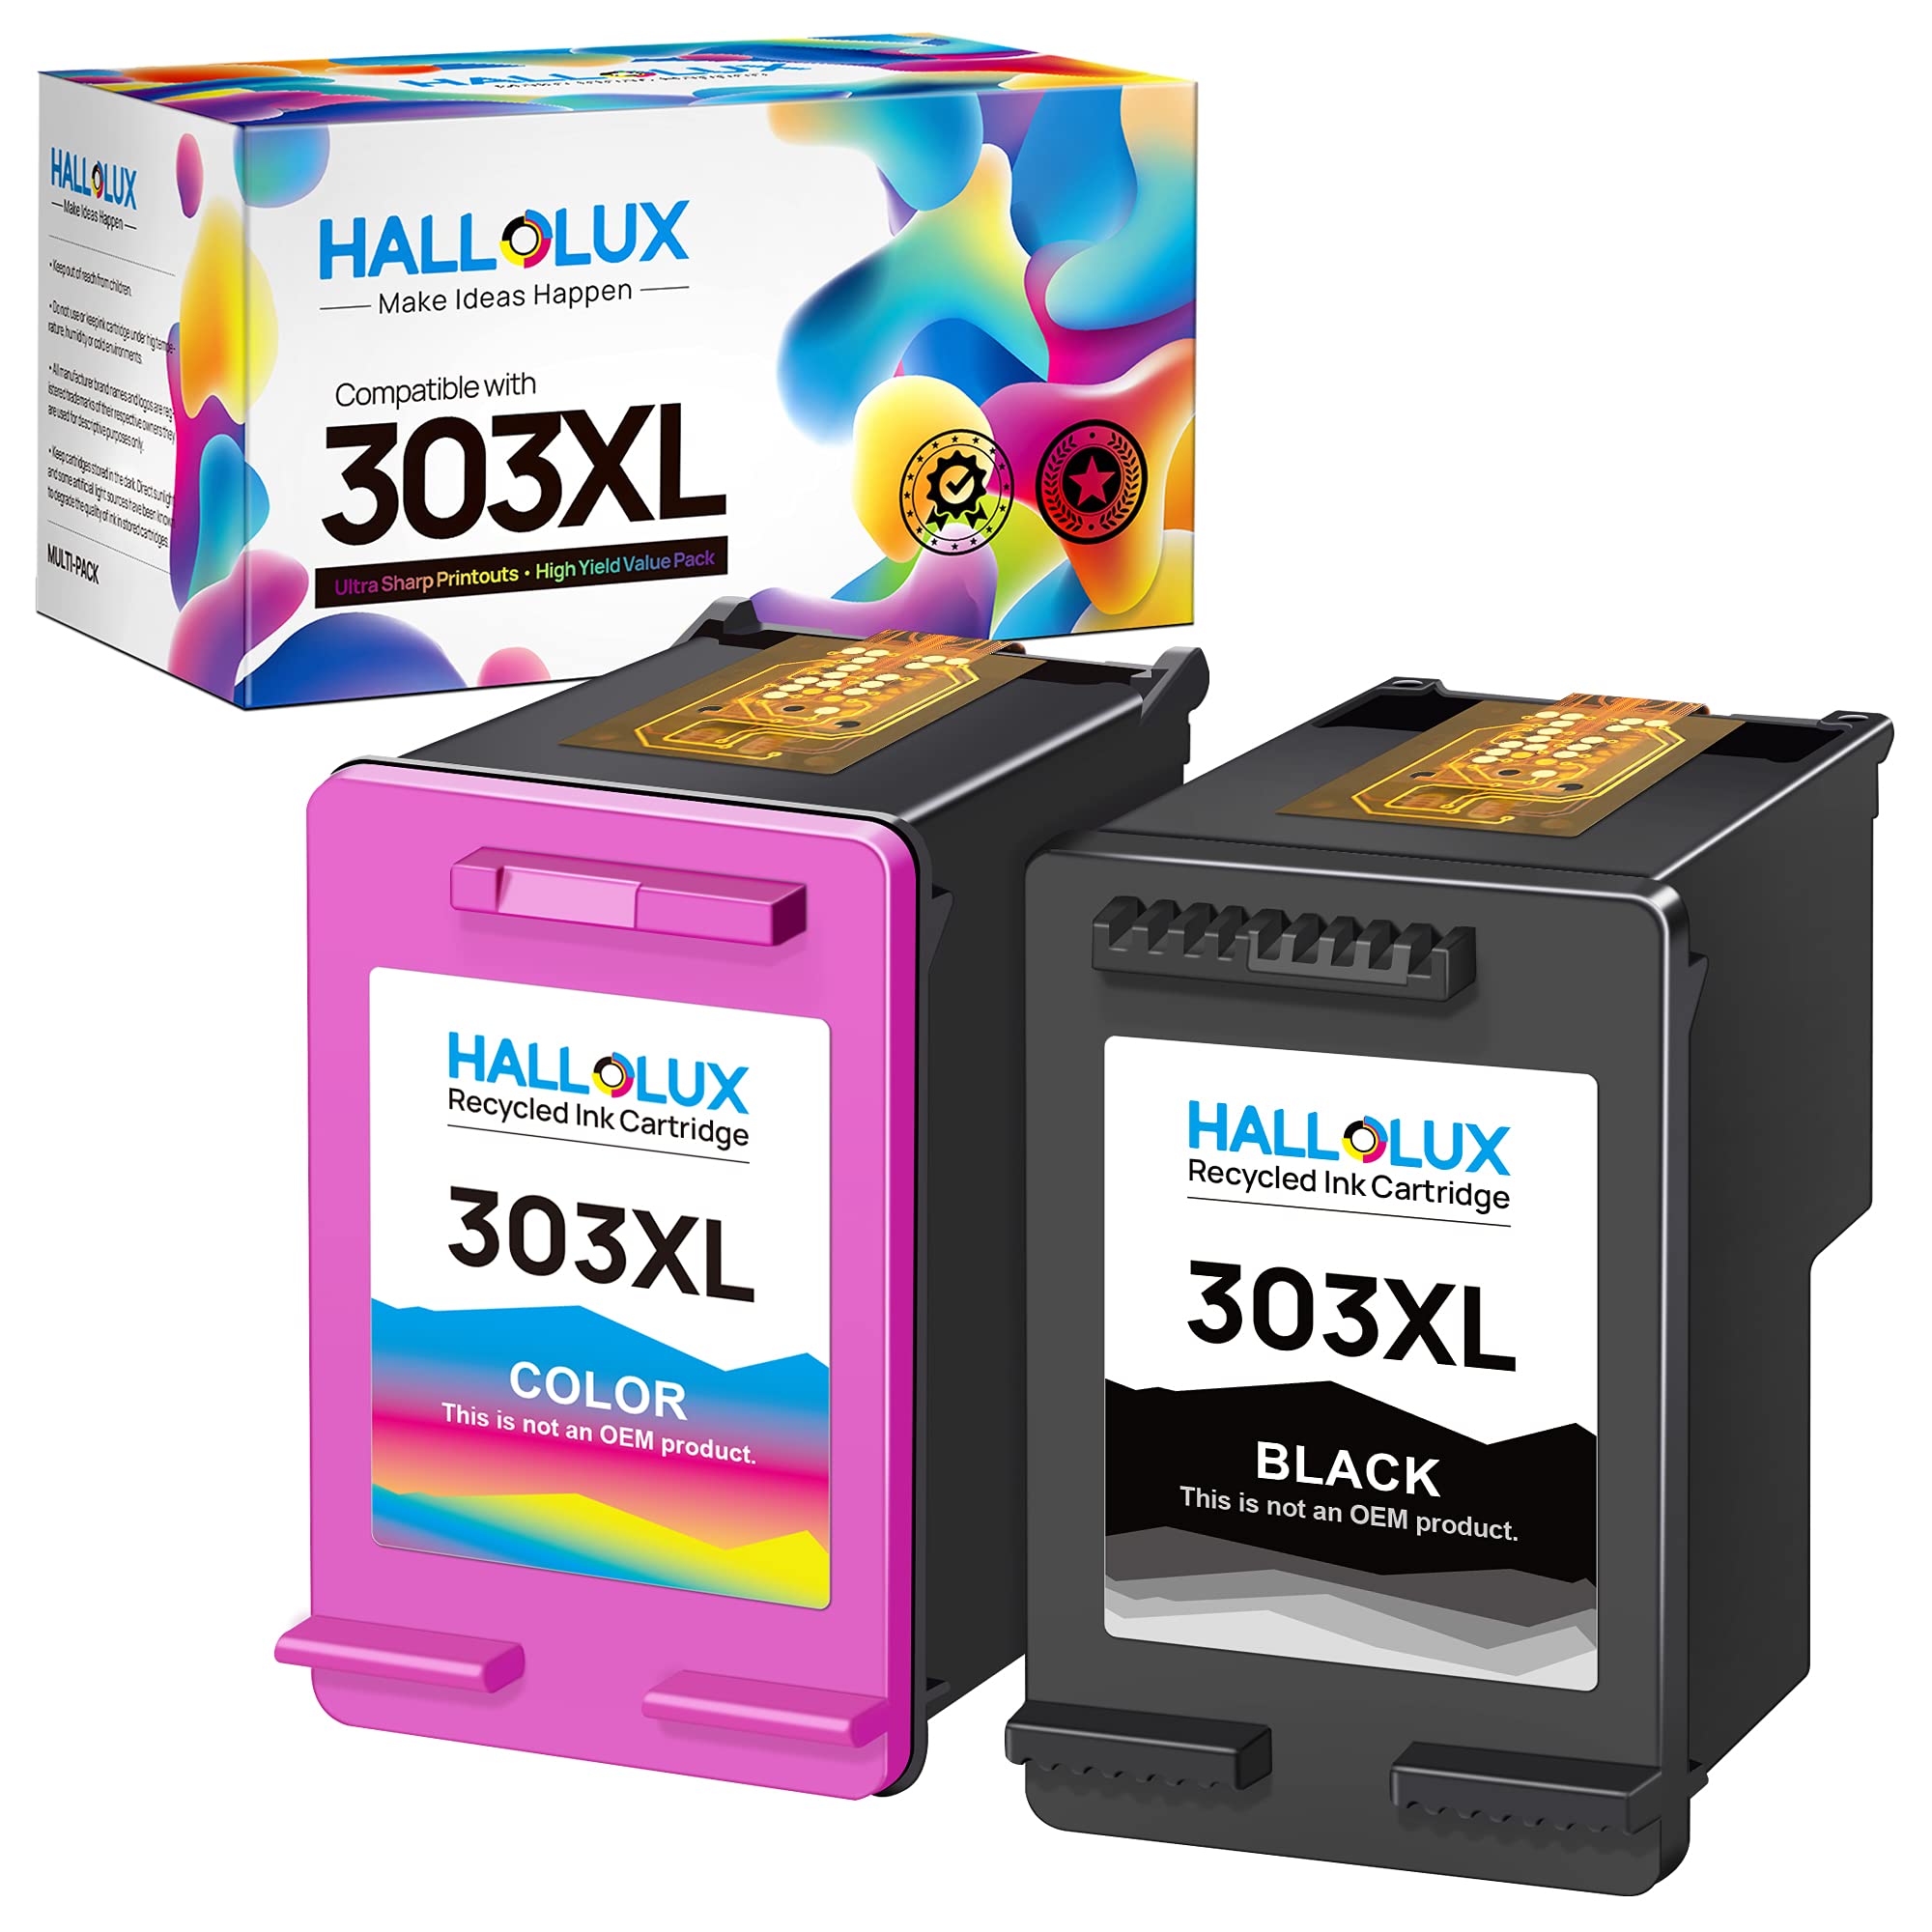 A+1 Remanufactured 303 XL Ink Cartridge Replacement for HP 303